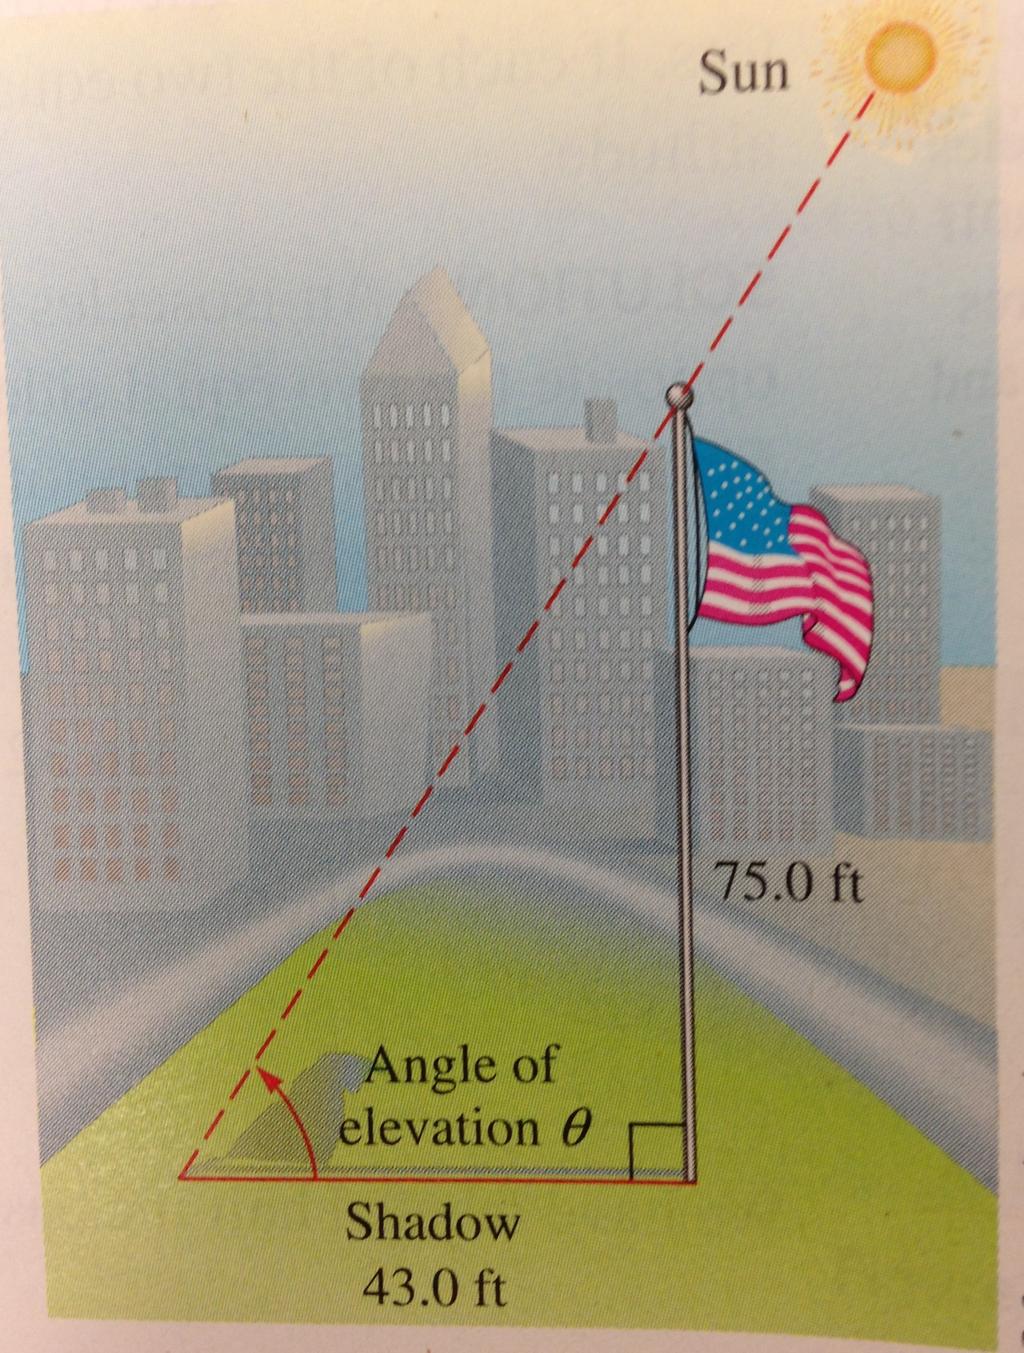 Exercise 4. If a 75.0-foot flagpole casts a shadow 43.